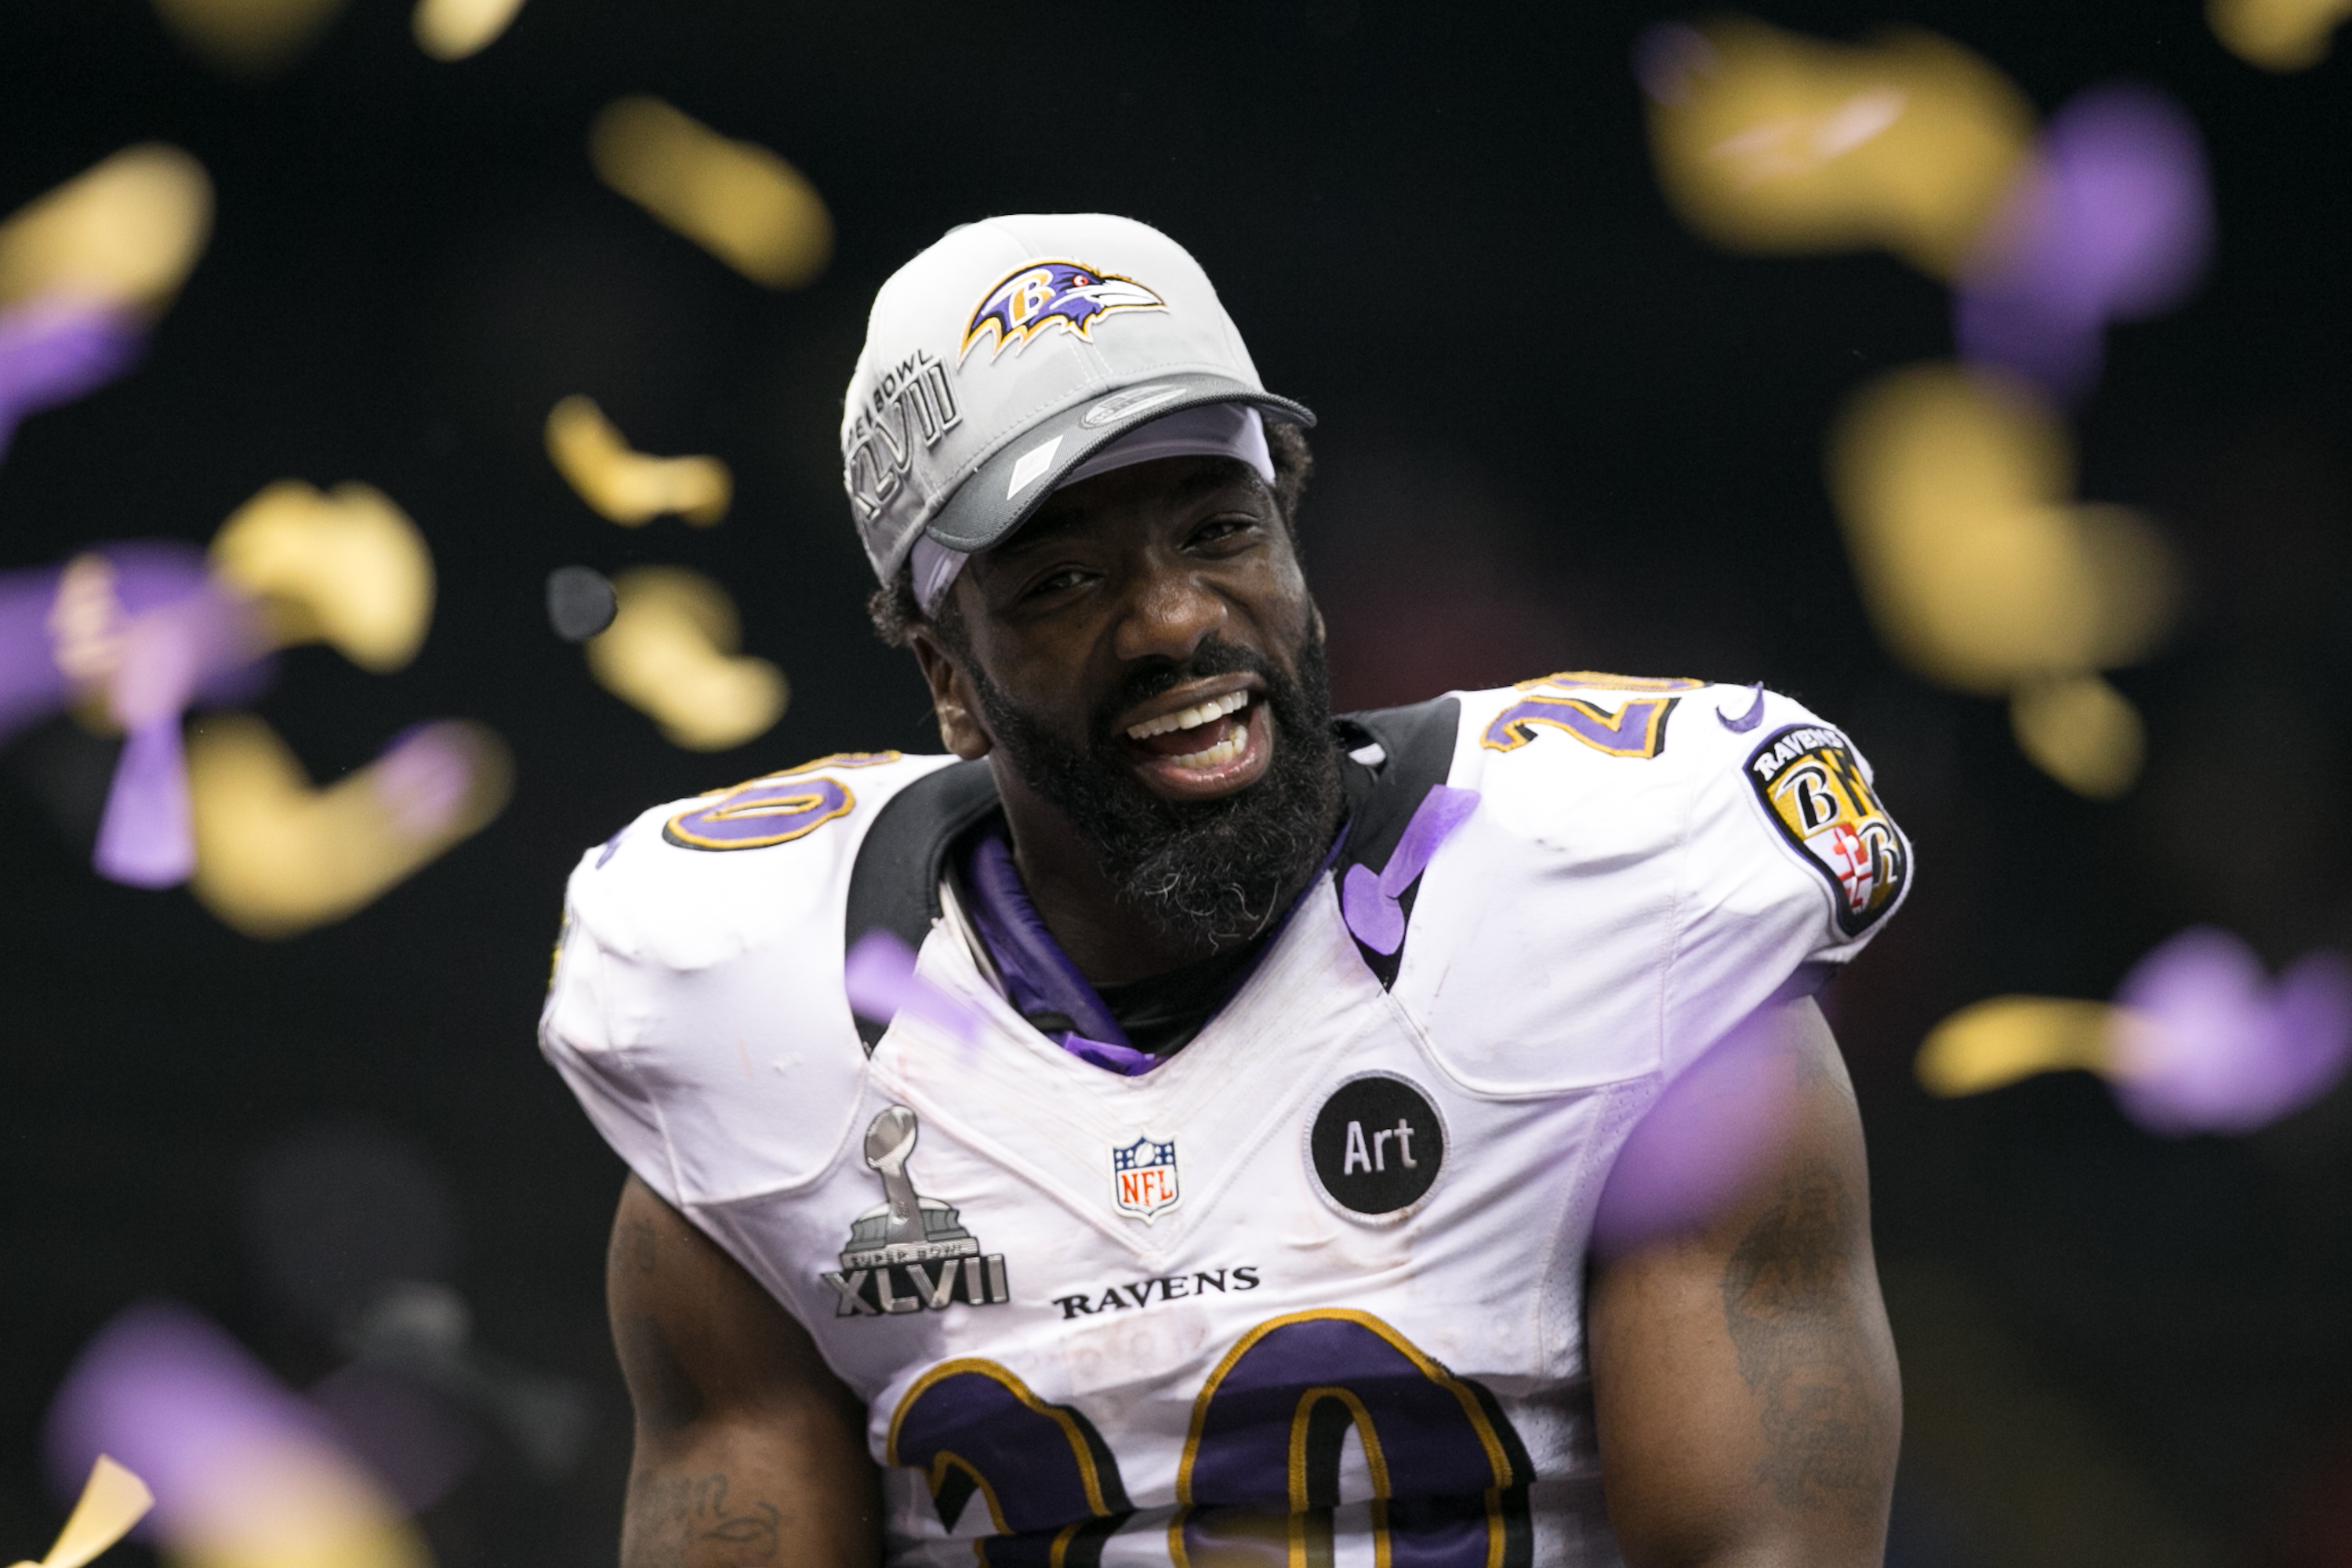 Baltimore Ravens free safety Ed Reed (20) smiles after defeating the San Francisco 49ers during Super Bowl XLVII at the Mercedes-Benz Superdome on Sunday, Feb. 3, 2013 in New Orleans (Perry Knotts—AP)